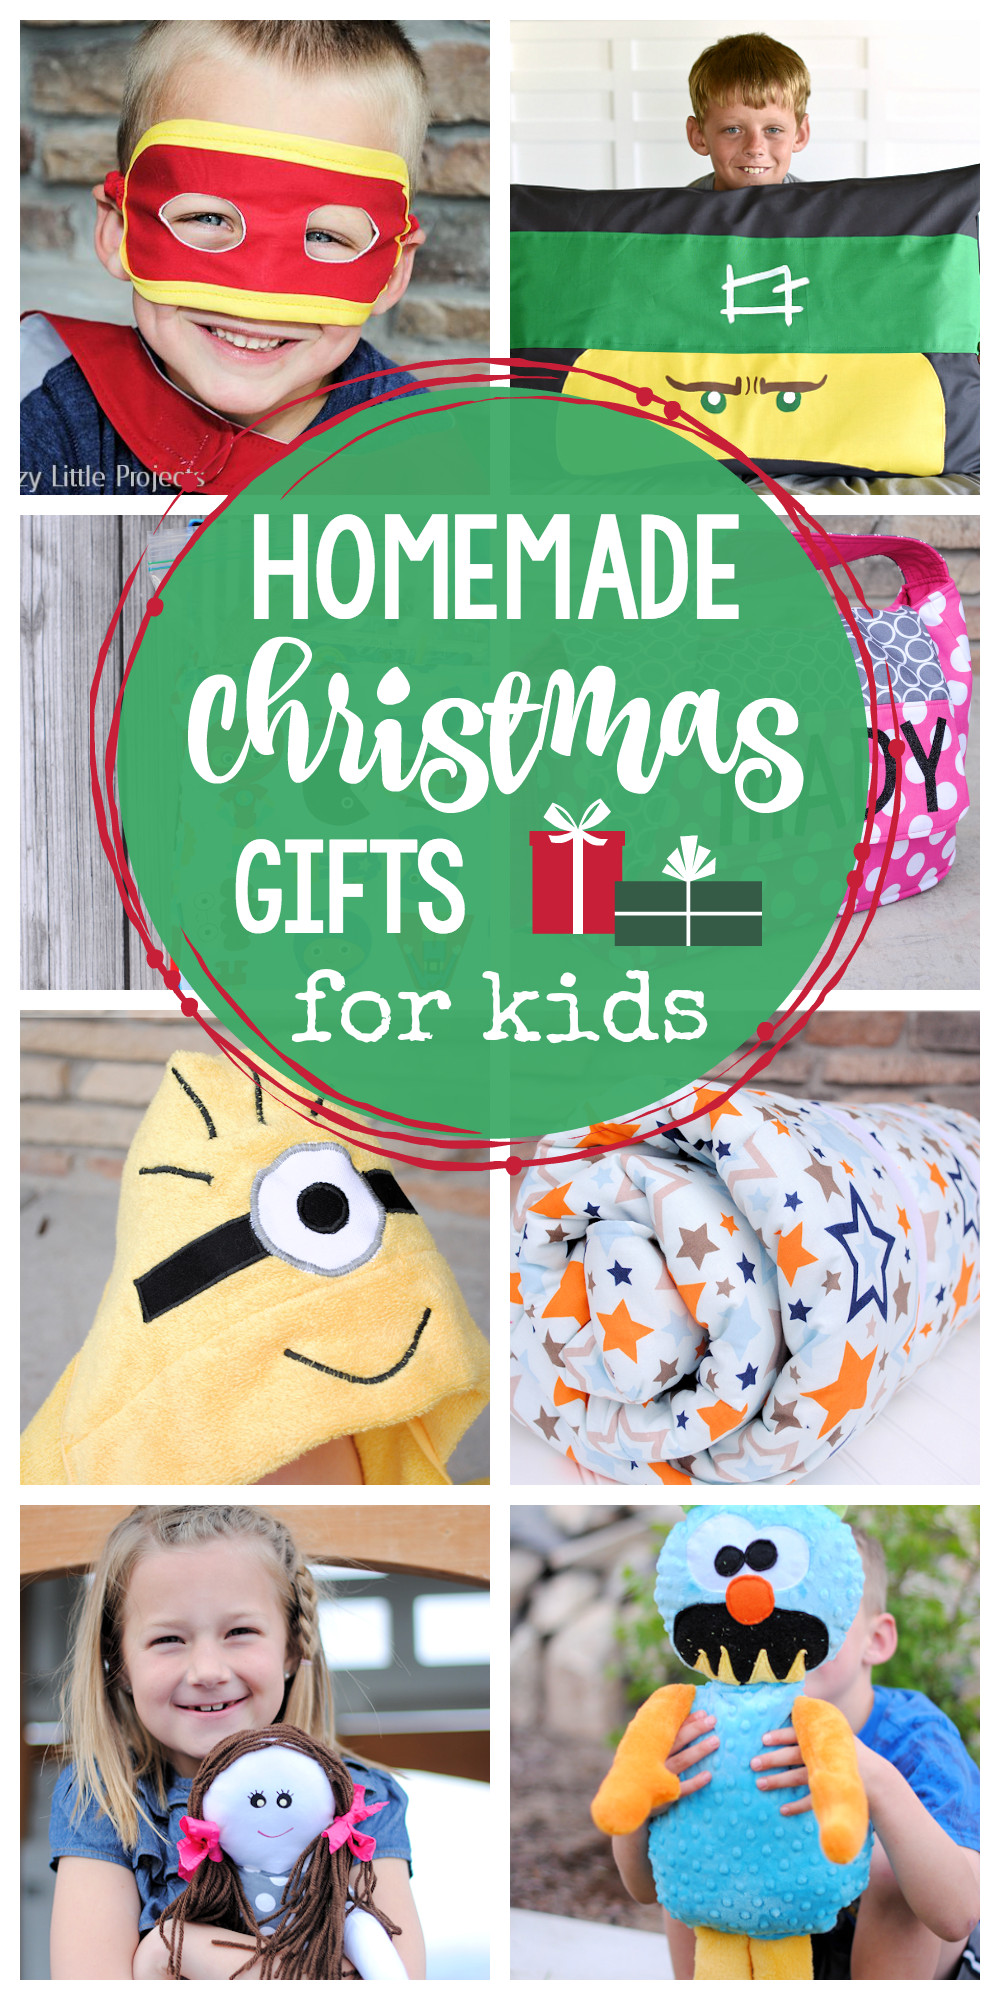 Kids Homemade Christmas Gift
 25 Homemade Christmas Gifts for Kids Crazy Little Projects